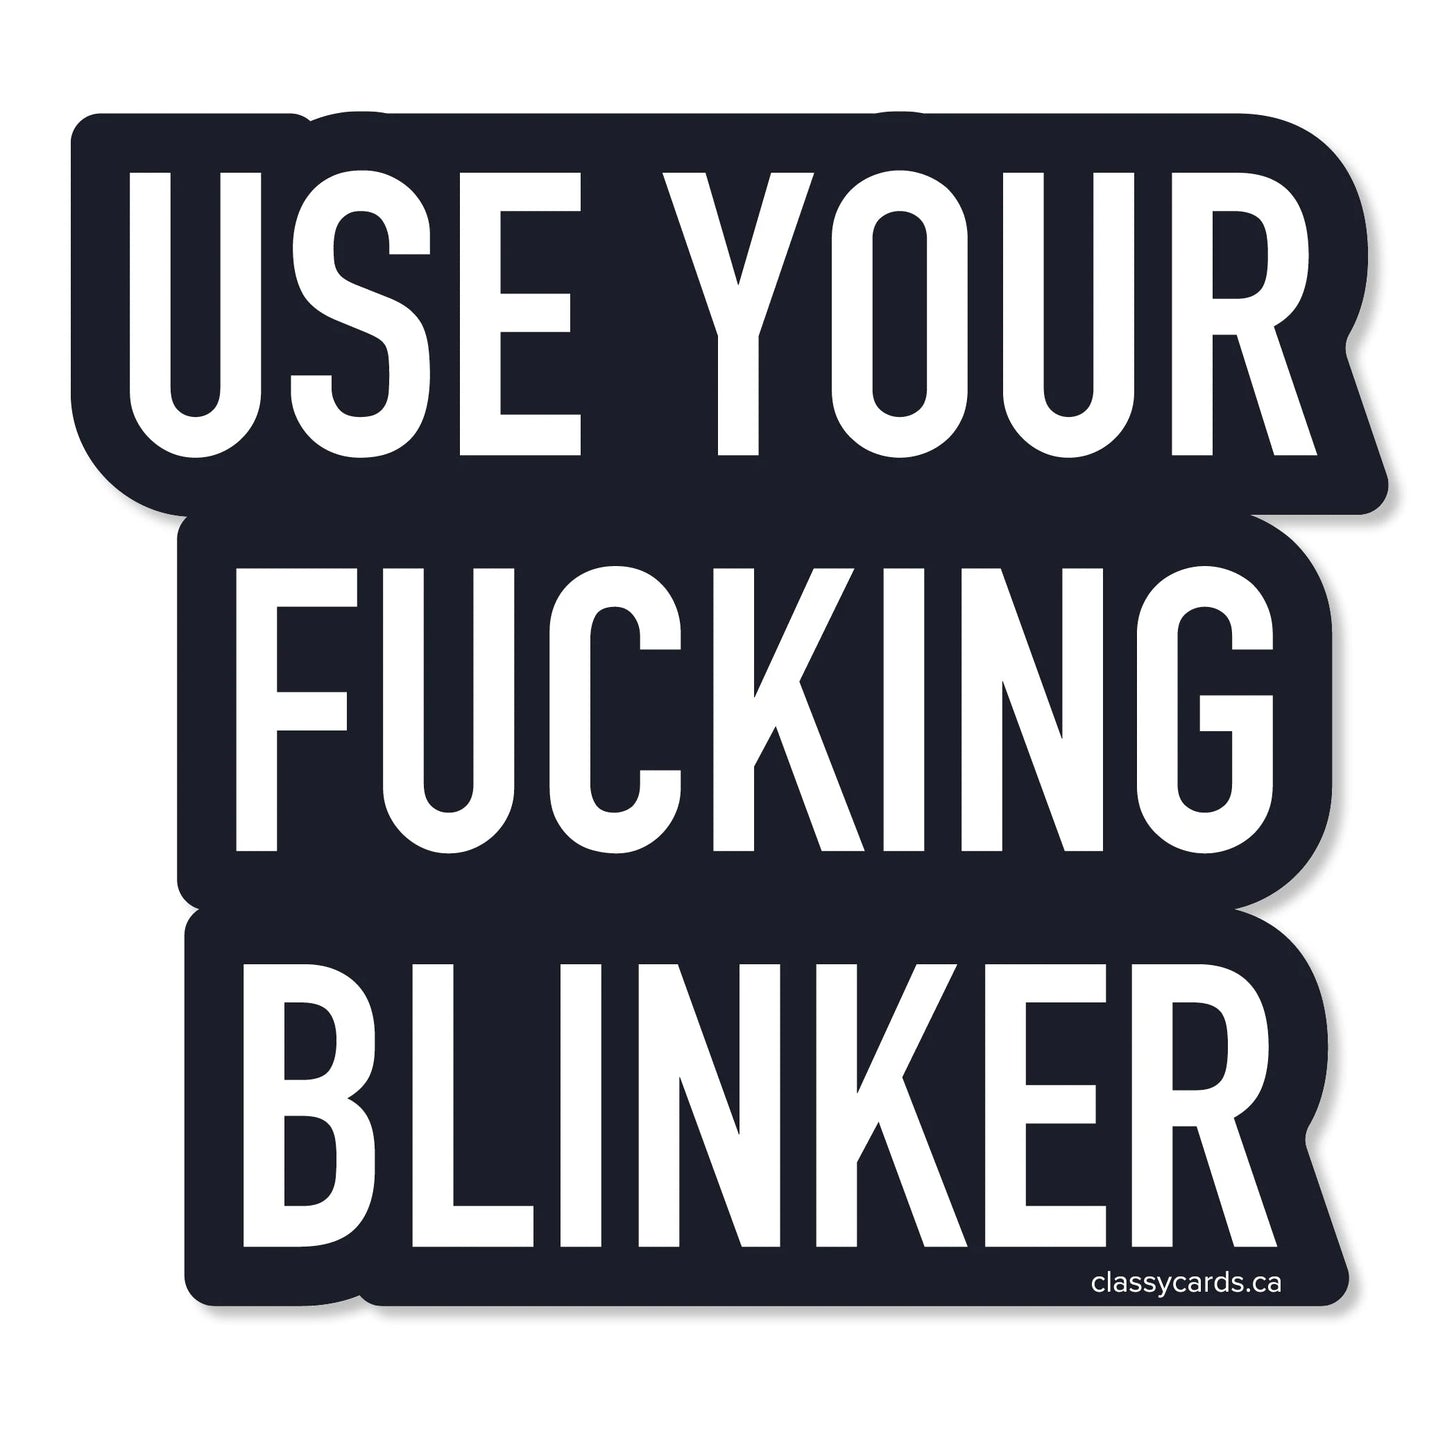 Use Your Blinker - Window Decal